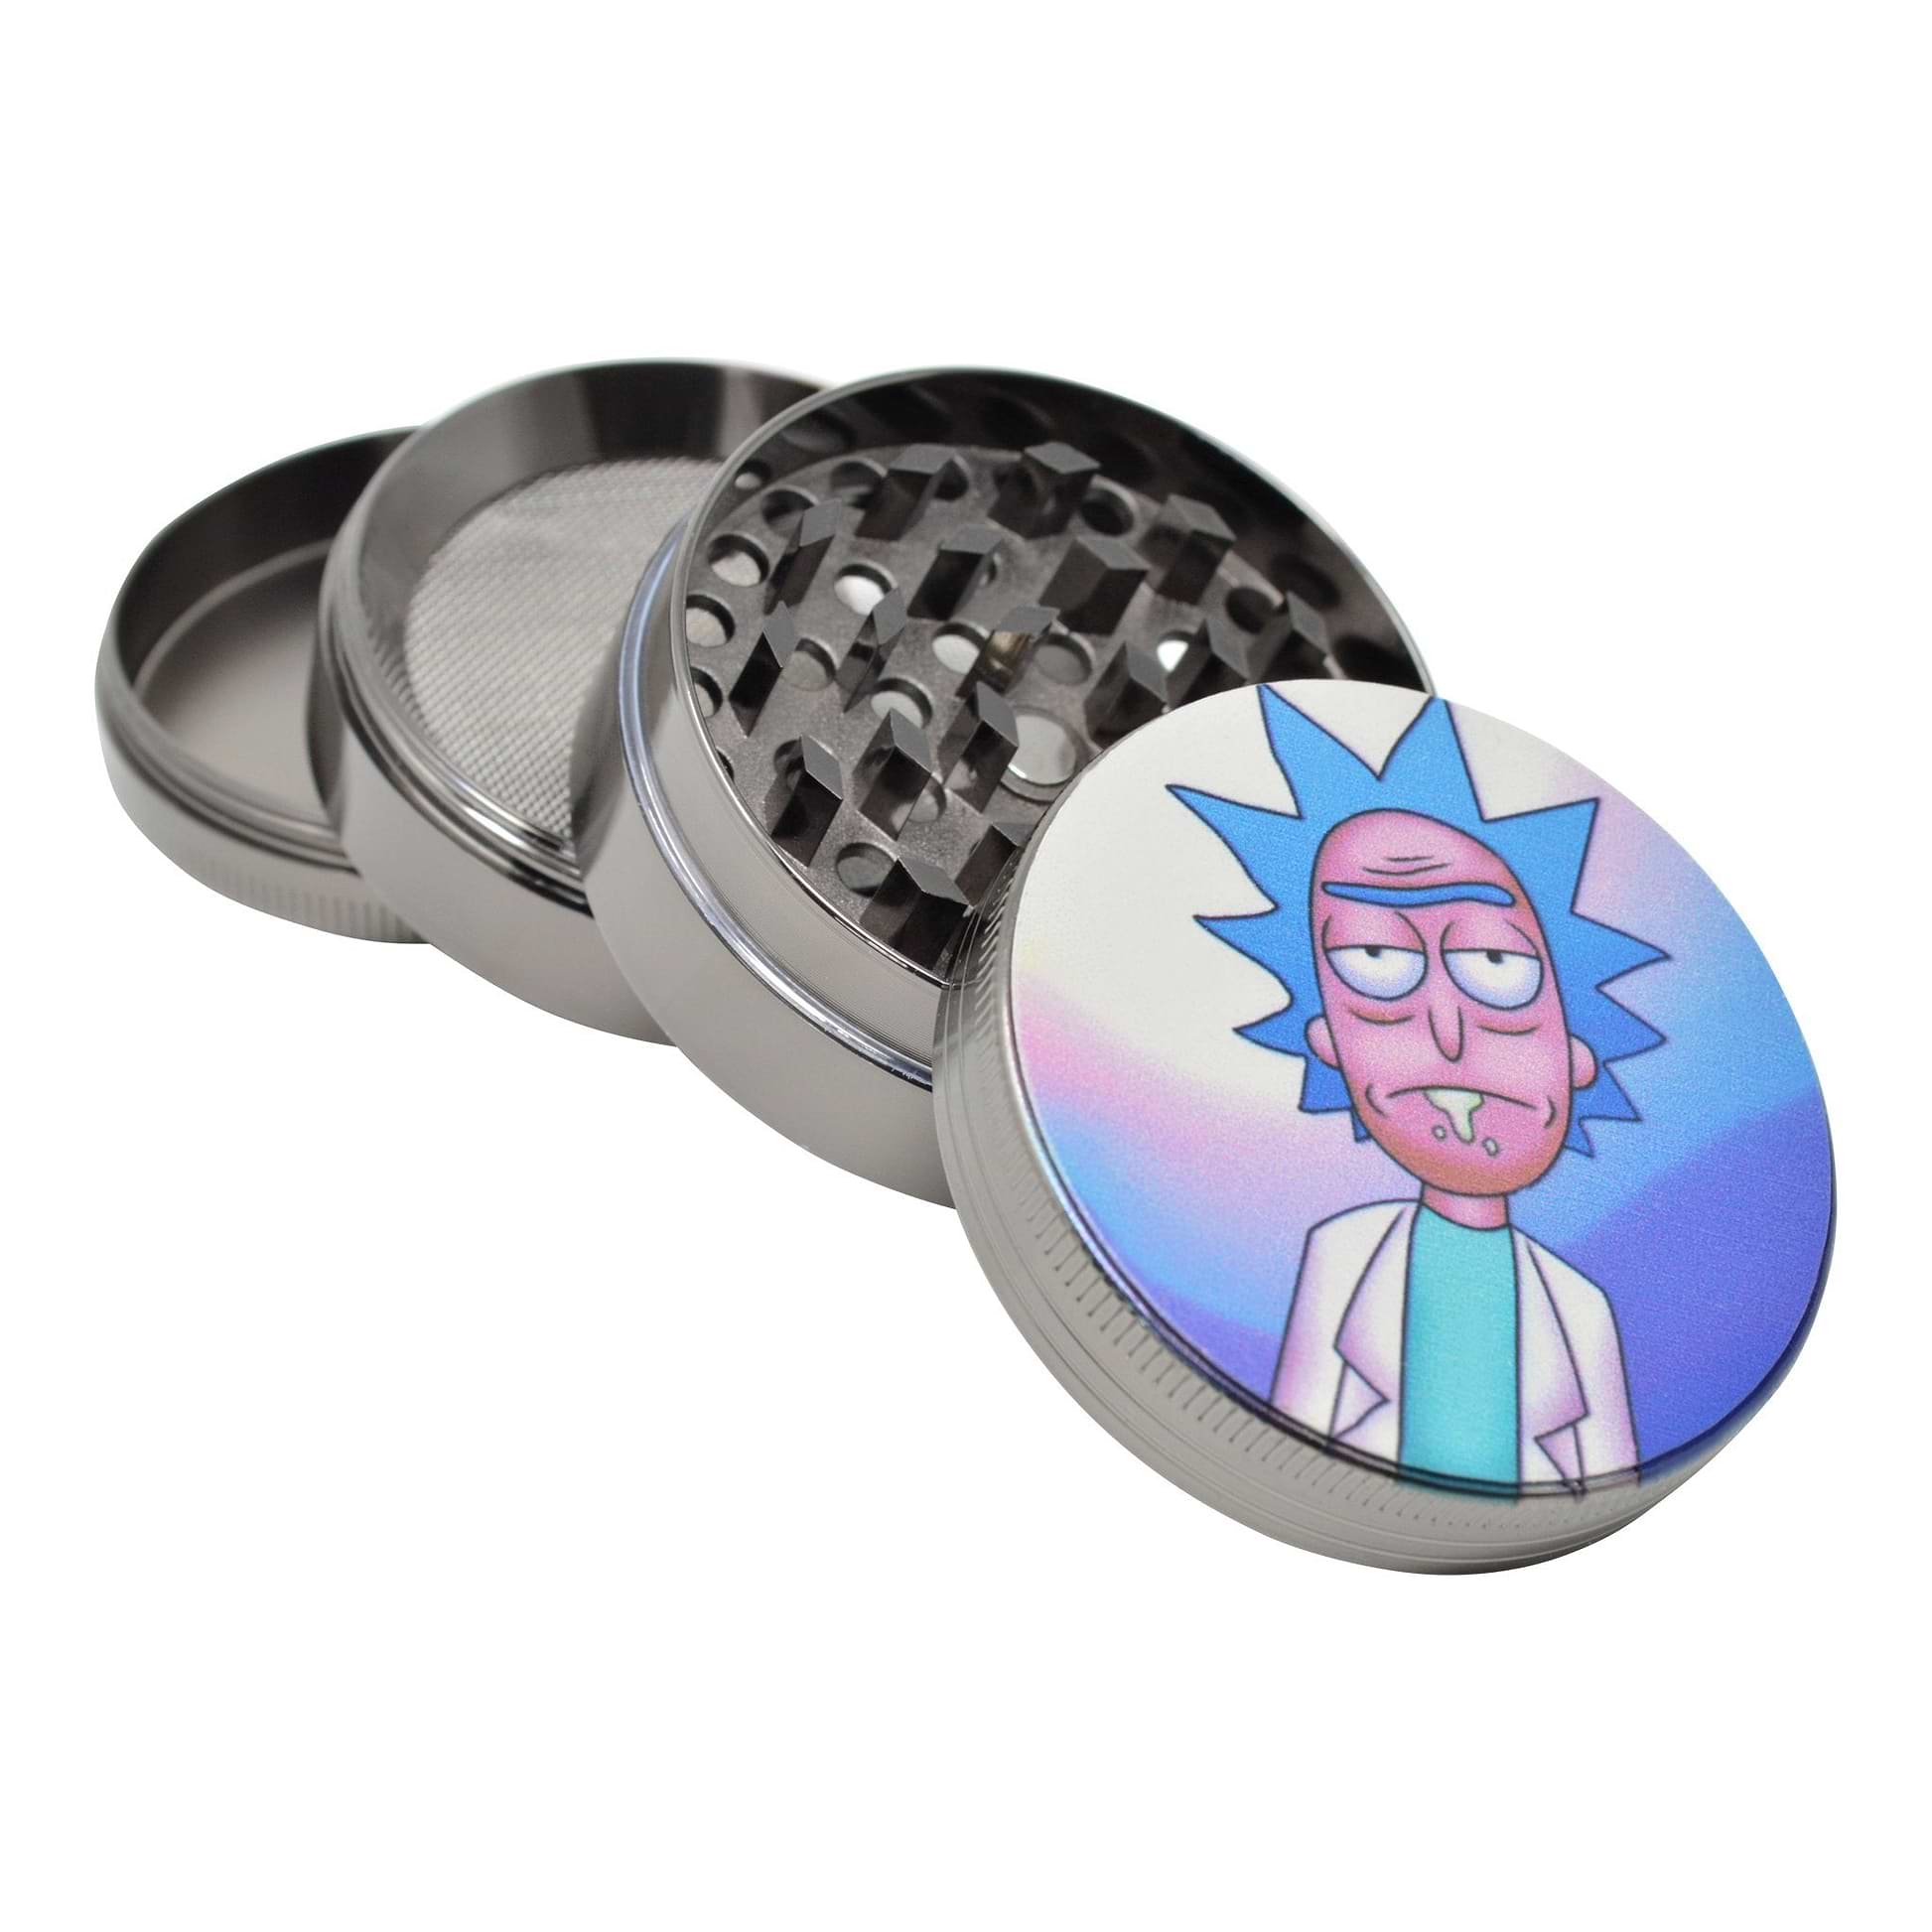 Rick & Morty 3 part Grinder 50mm (1 count) - Accessories